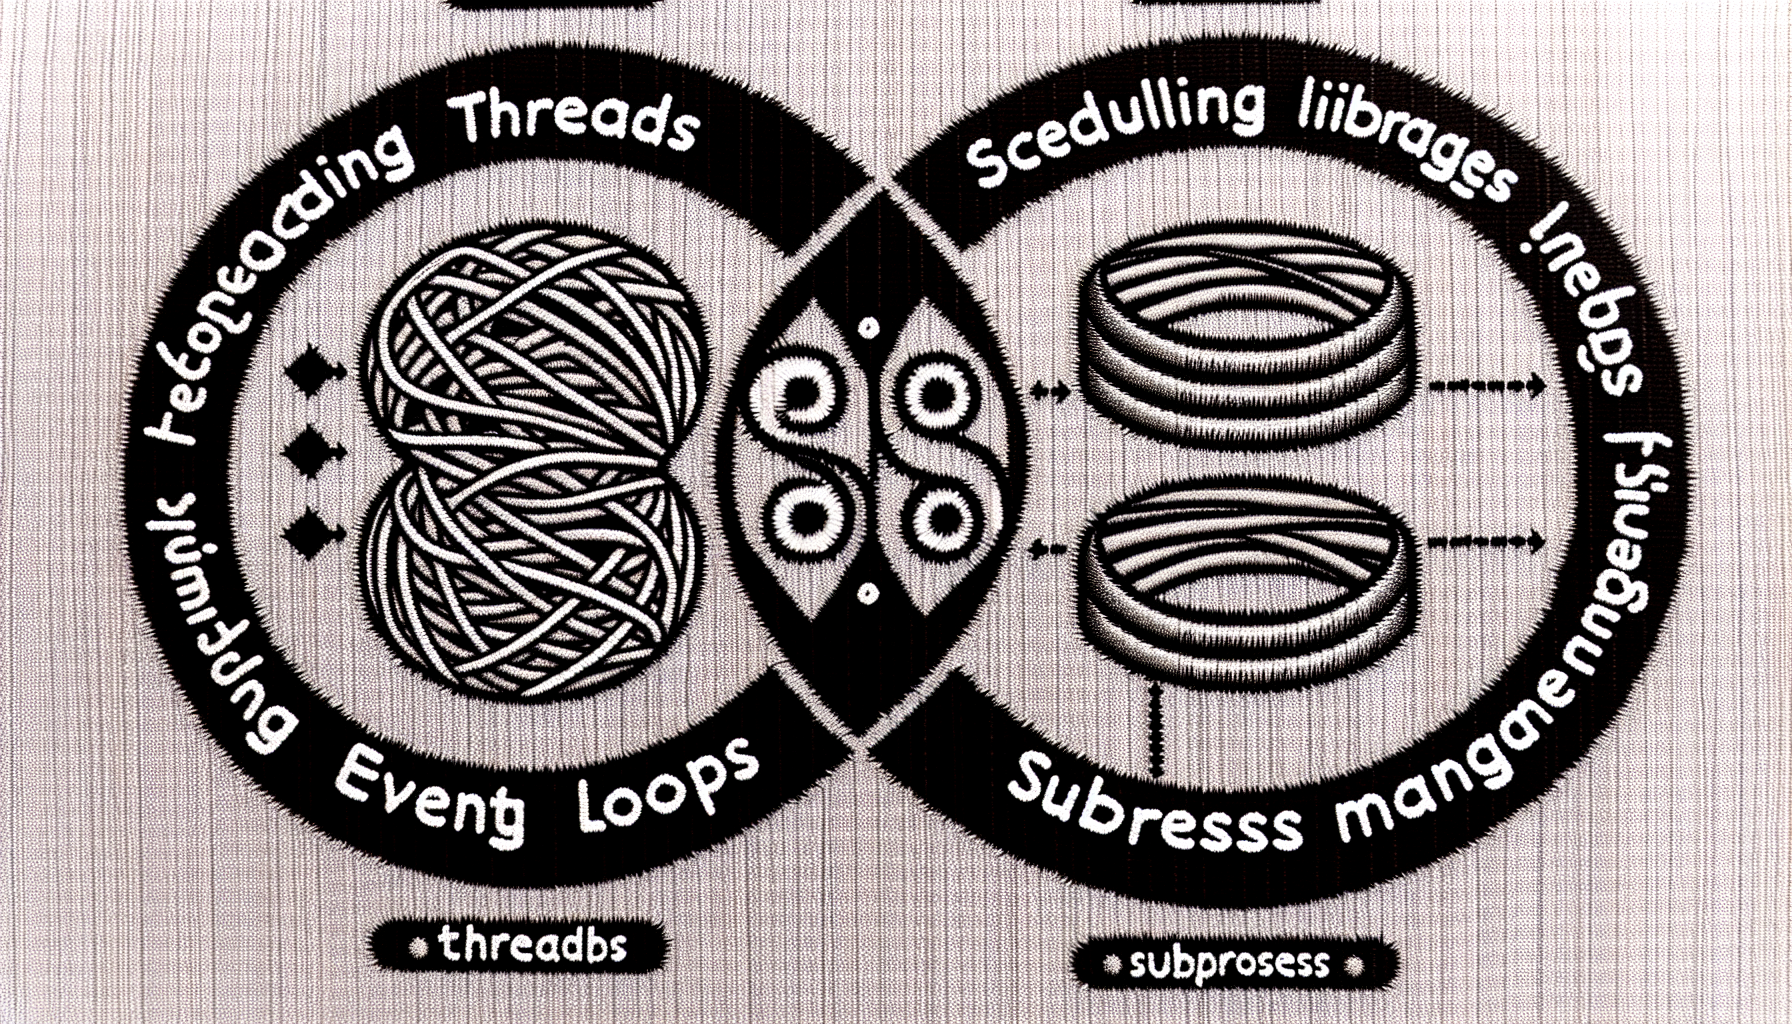 A visual representation of Python scheduling libraries showcasing threads, event loops, and subprocess management